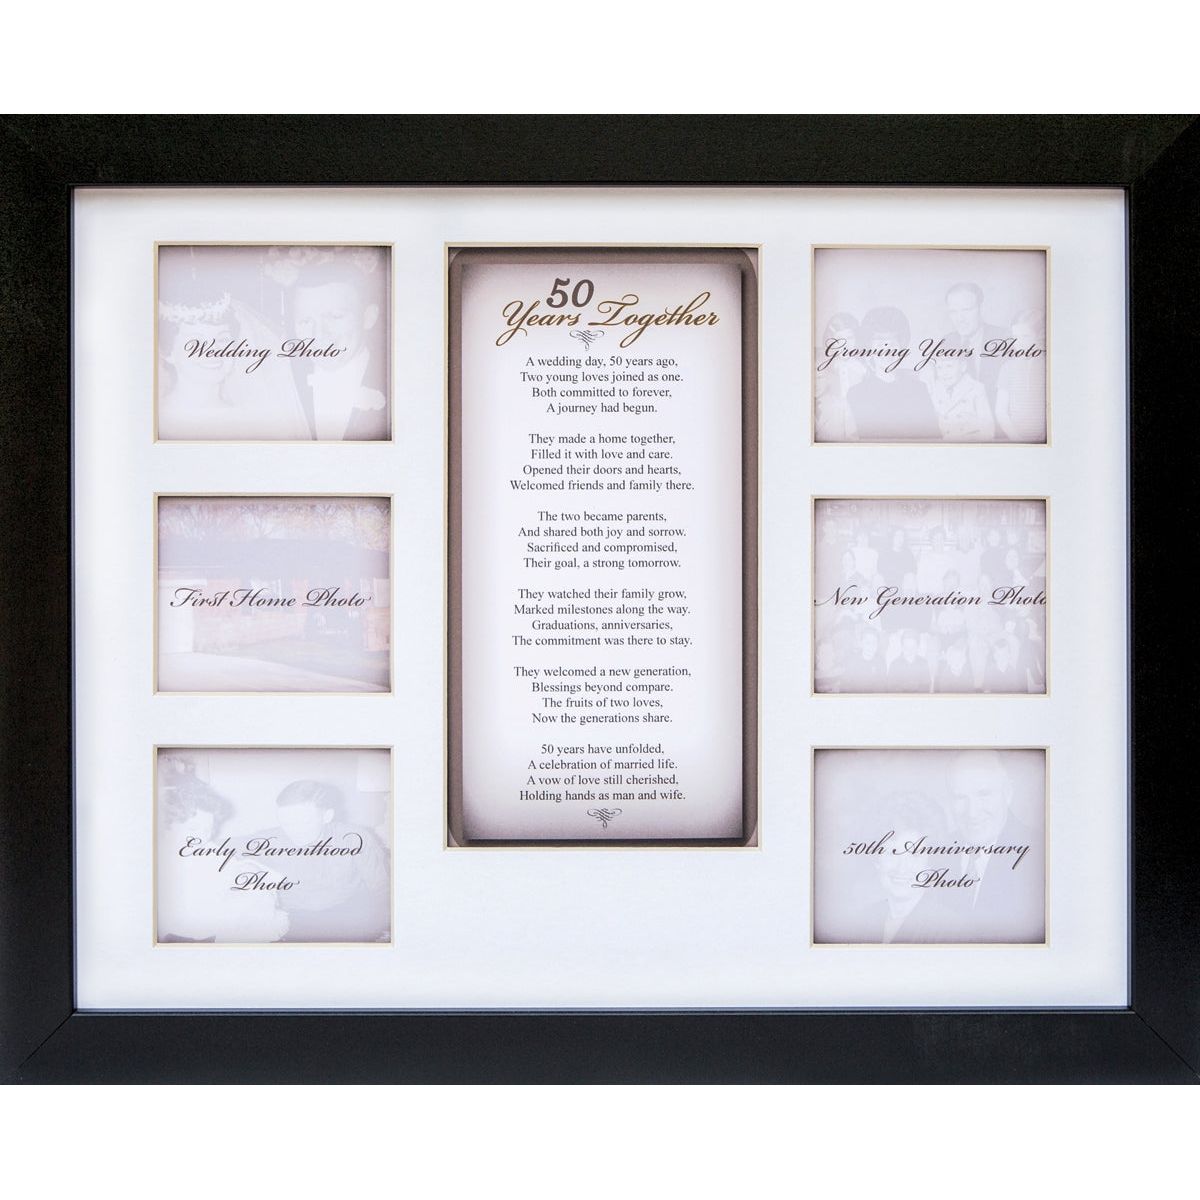 11x14 50th Wedding Anniversary Black Photo Wall Frame with "50 Years Together" sentiment in the center and space for 6 photographs of the couple's life across the years.